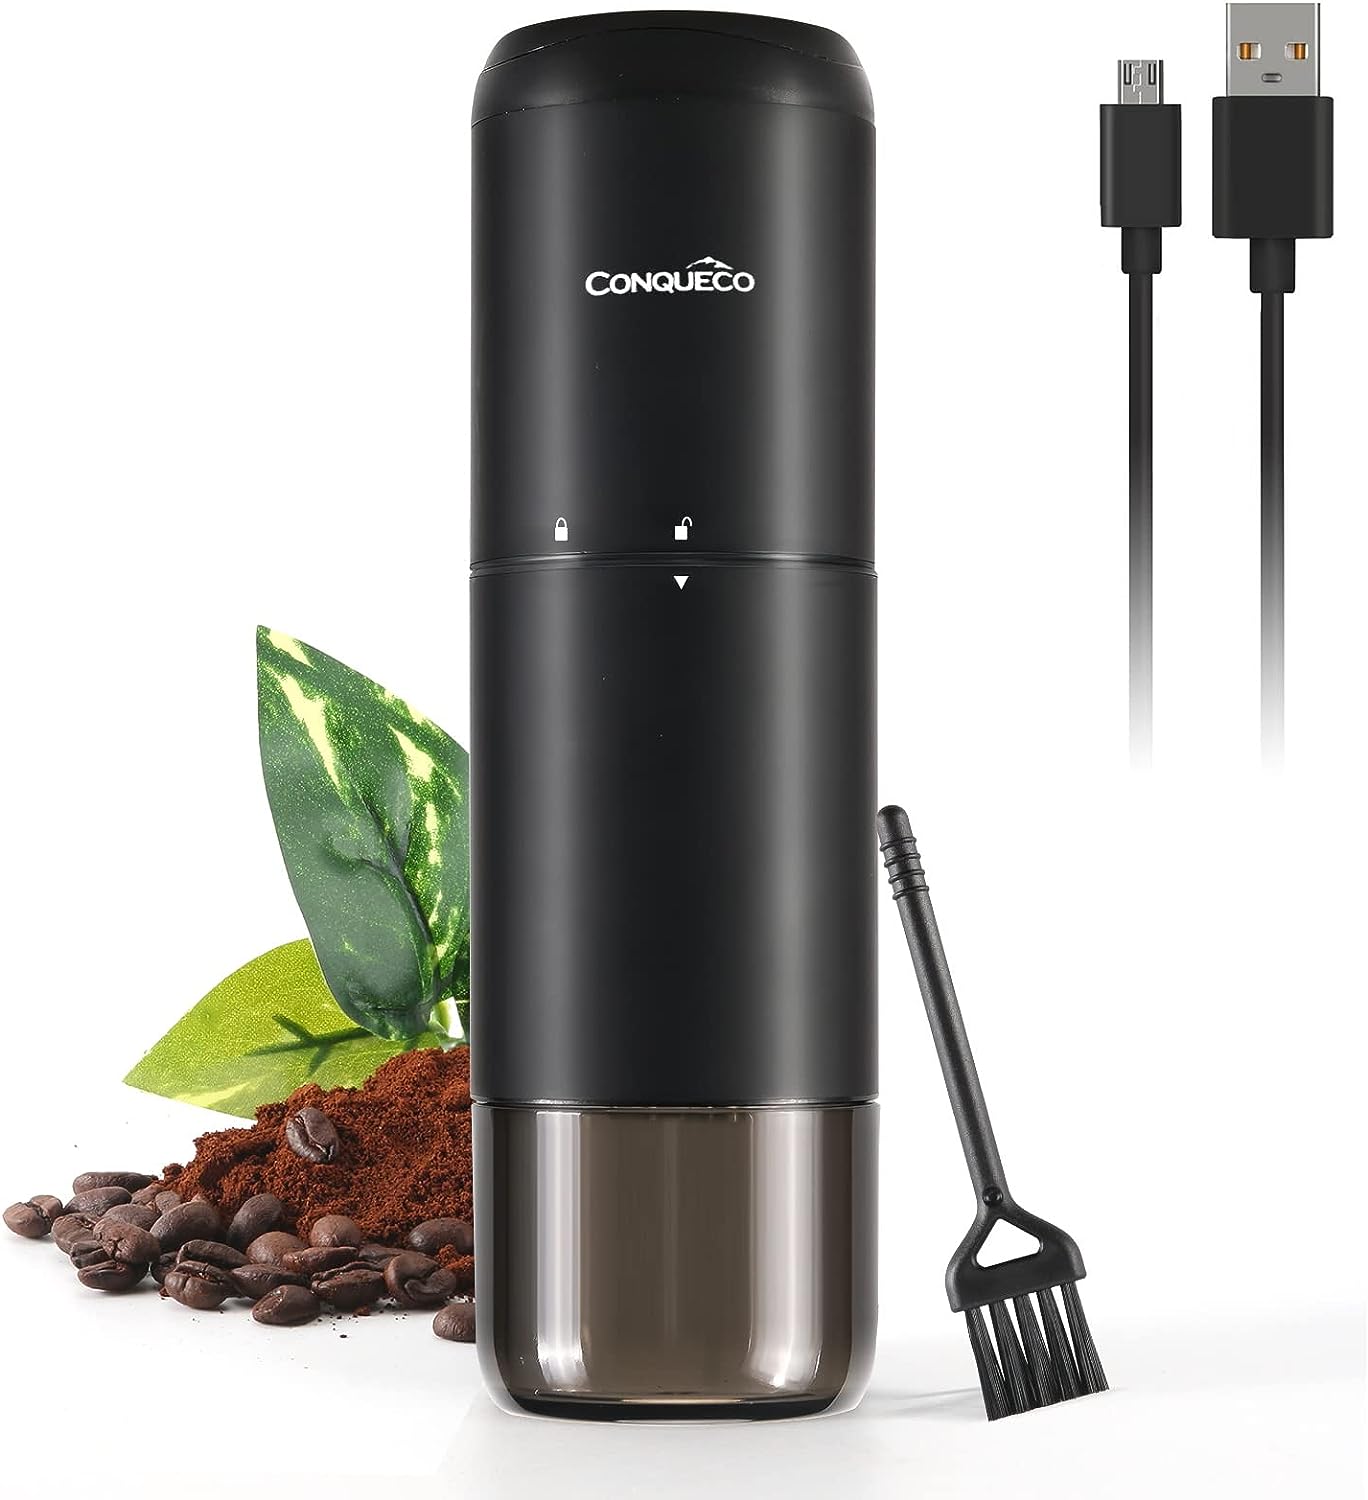 Portable Coffee Grinder with Electric Burr: Conqueco Small Coffee Bean Grinder - Rechargeable Conical Stainless Steel Grinder with Multiple Grinding Settings, 20g(with Brush)